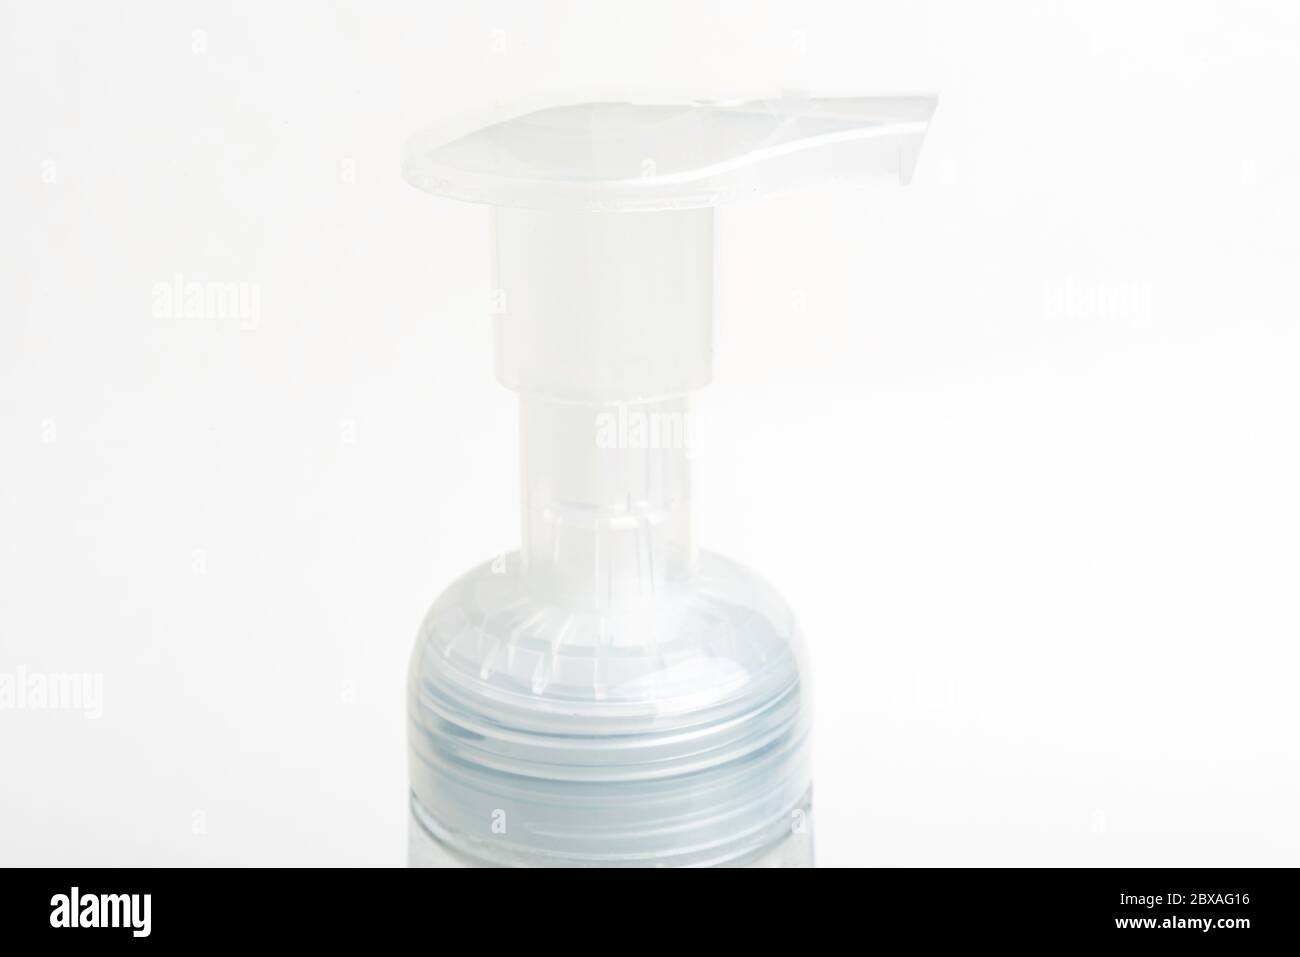 A close-up image of the translucent top pump of a foam soap plastic bottle dispenser set on a white background. Stock Photo